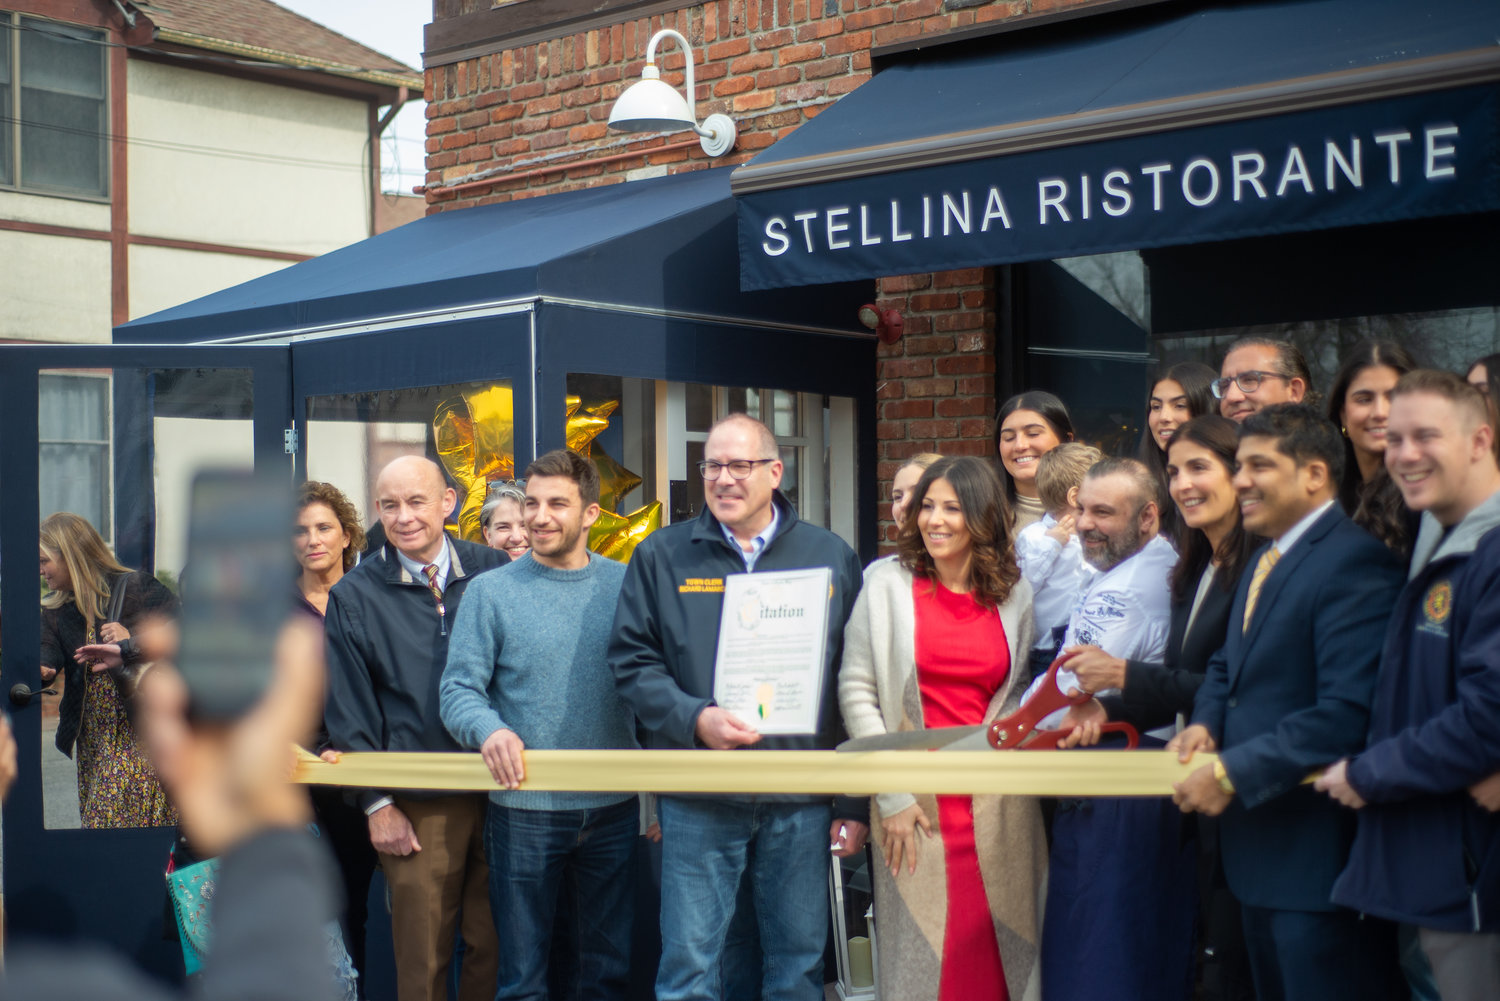 The chamber and town welcomed Stellina, a new Italian restaurant in the hamlet.